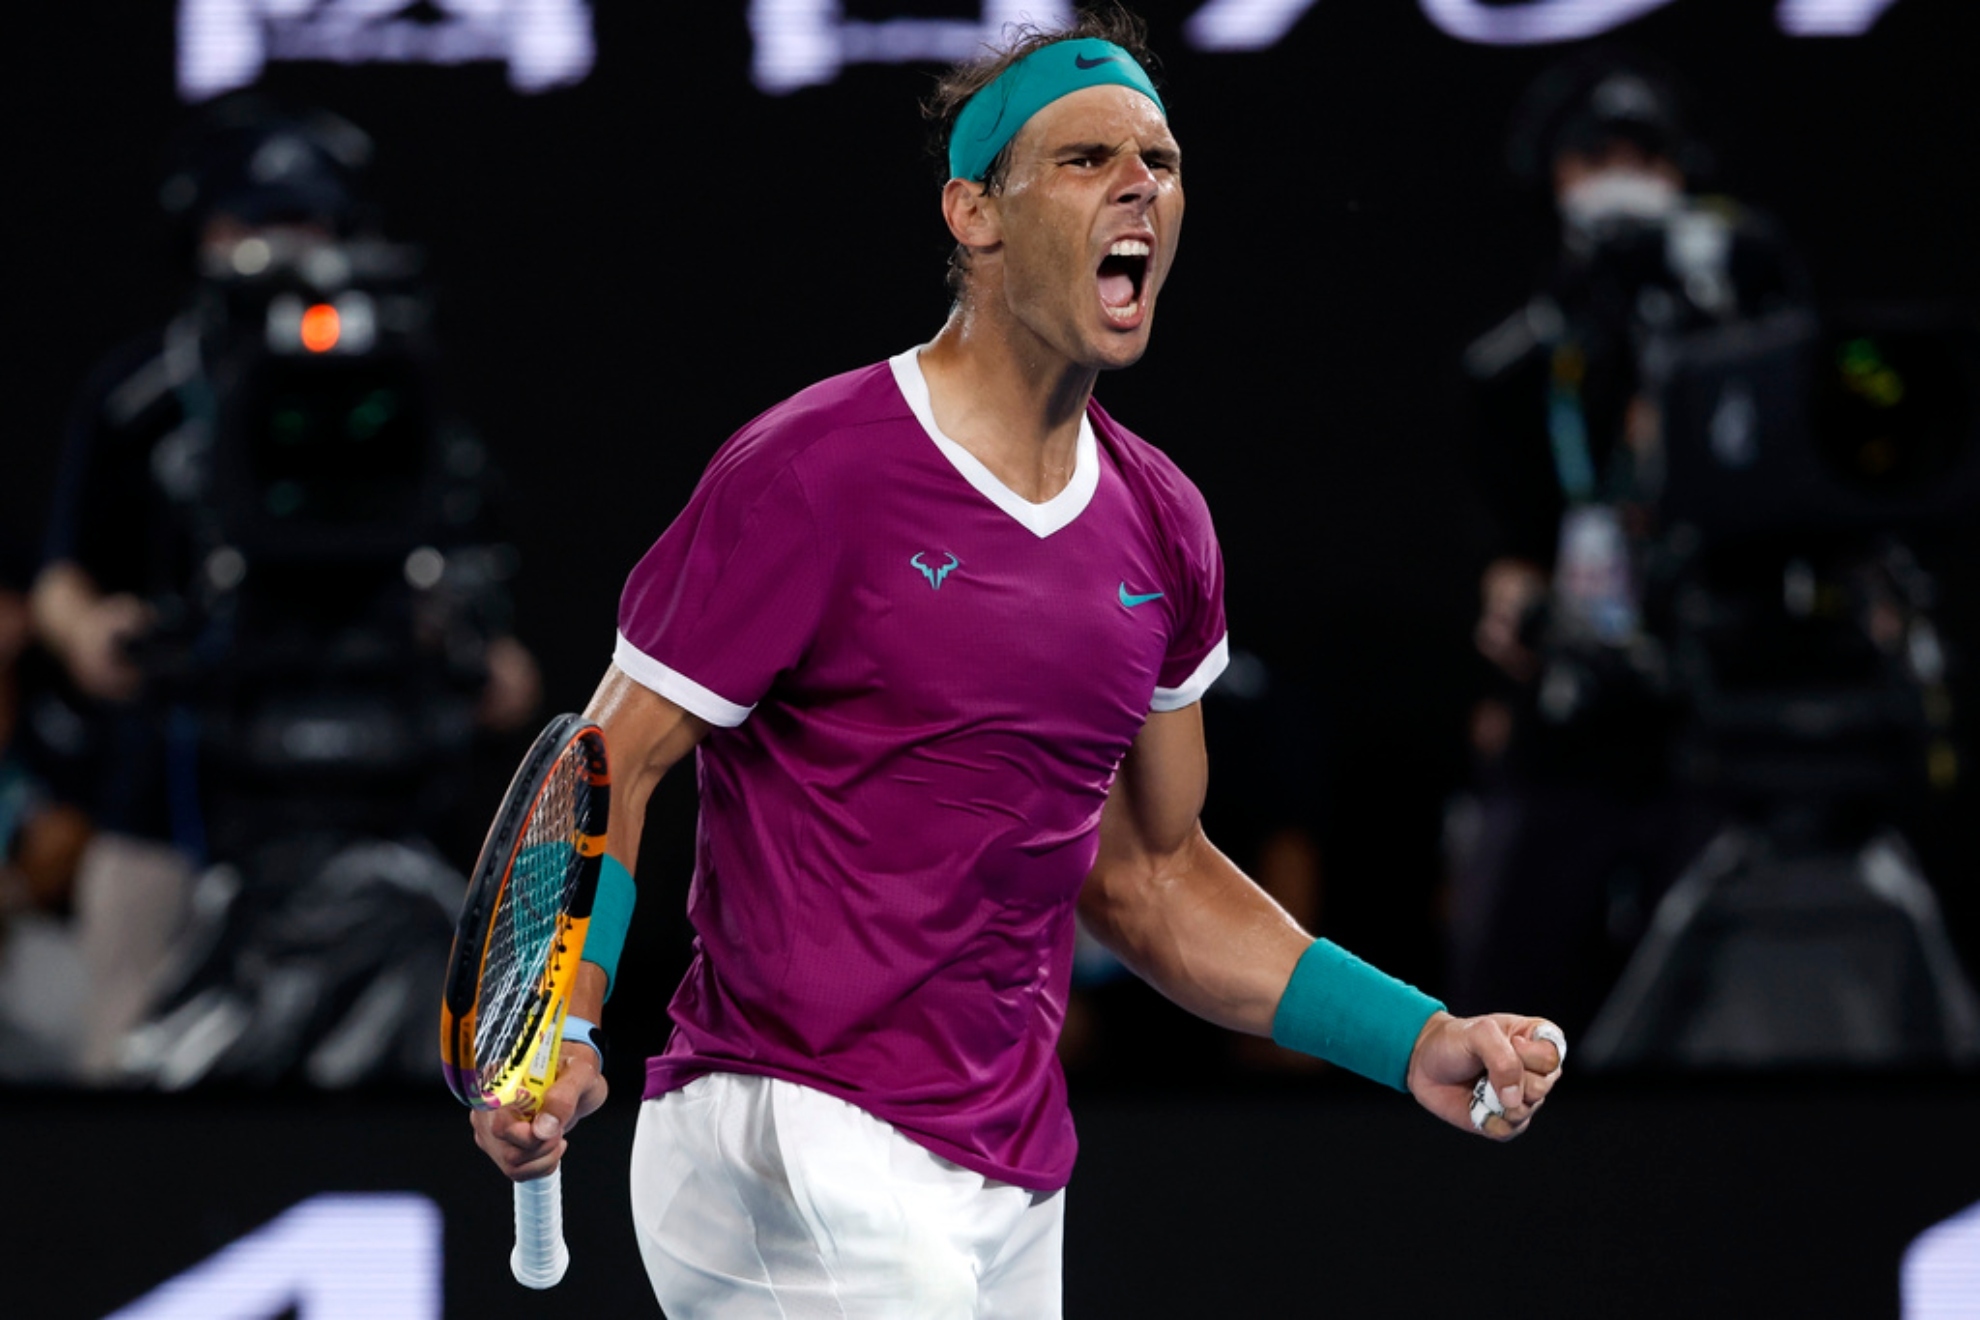 Nadal Net Worth: How much money has he made from tournaments?